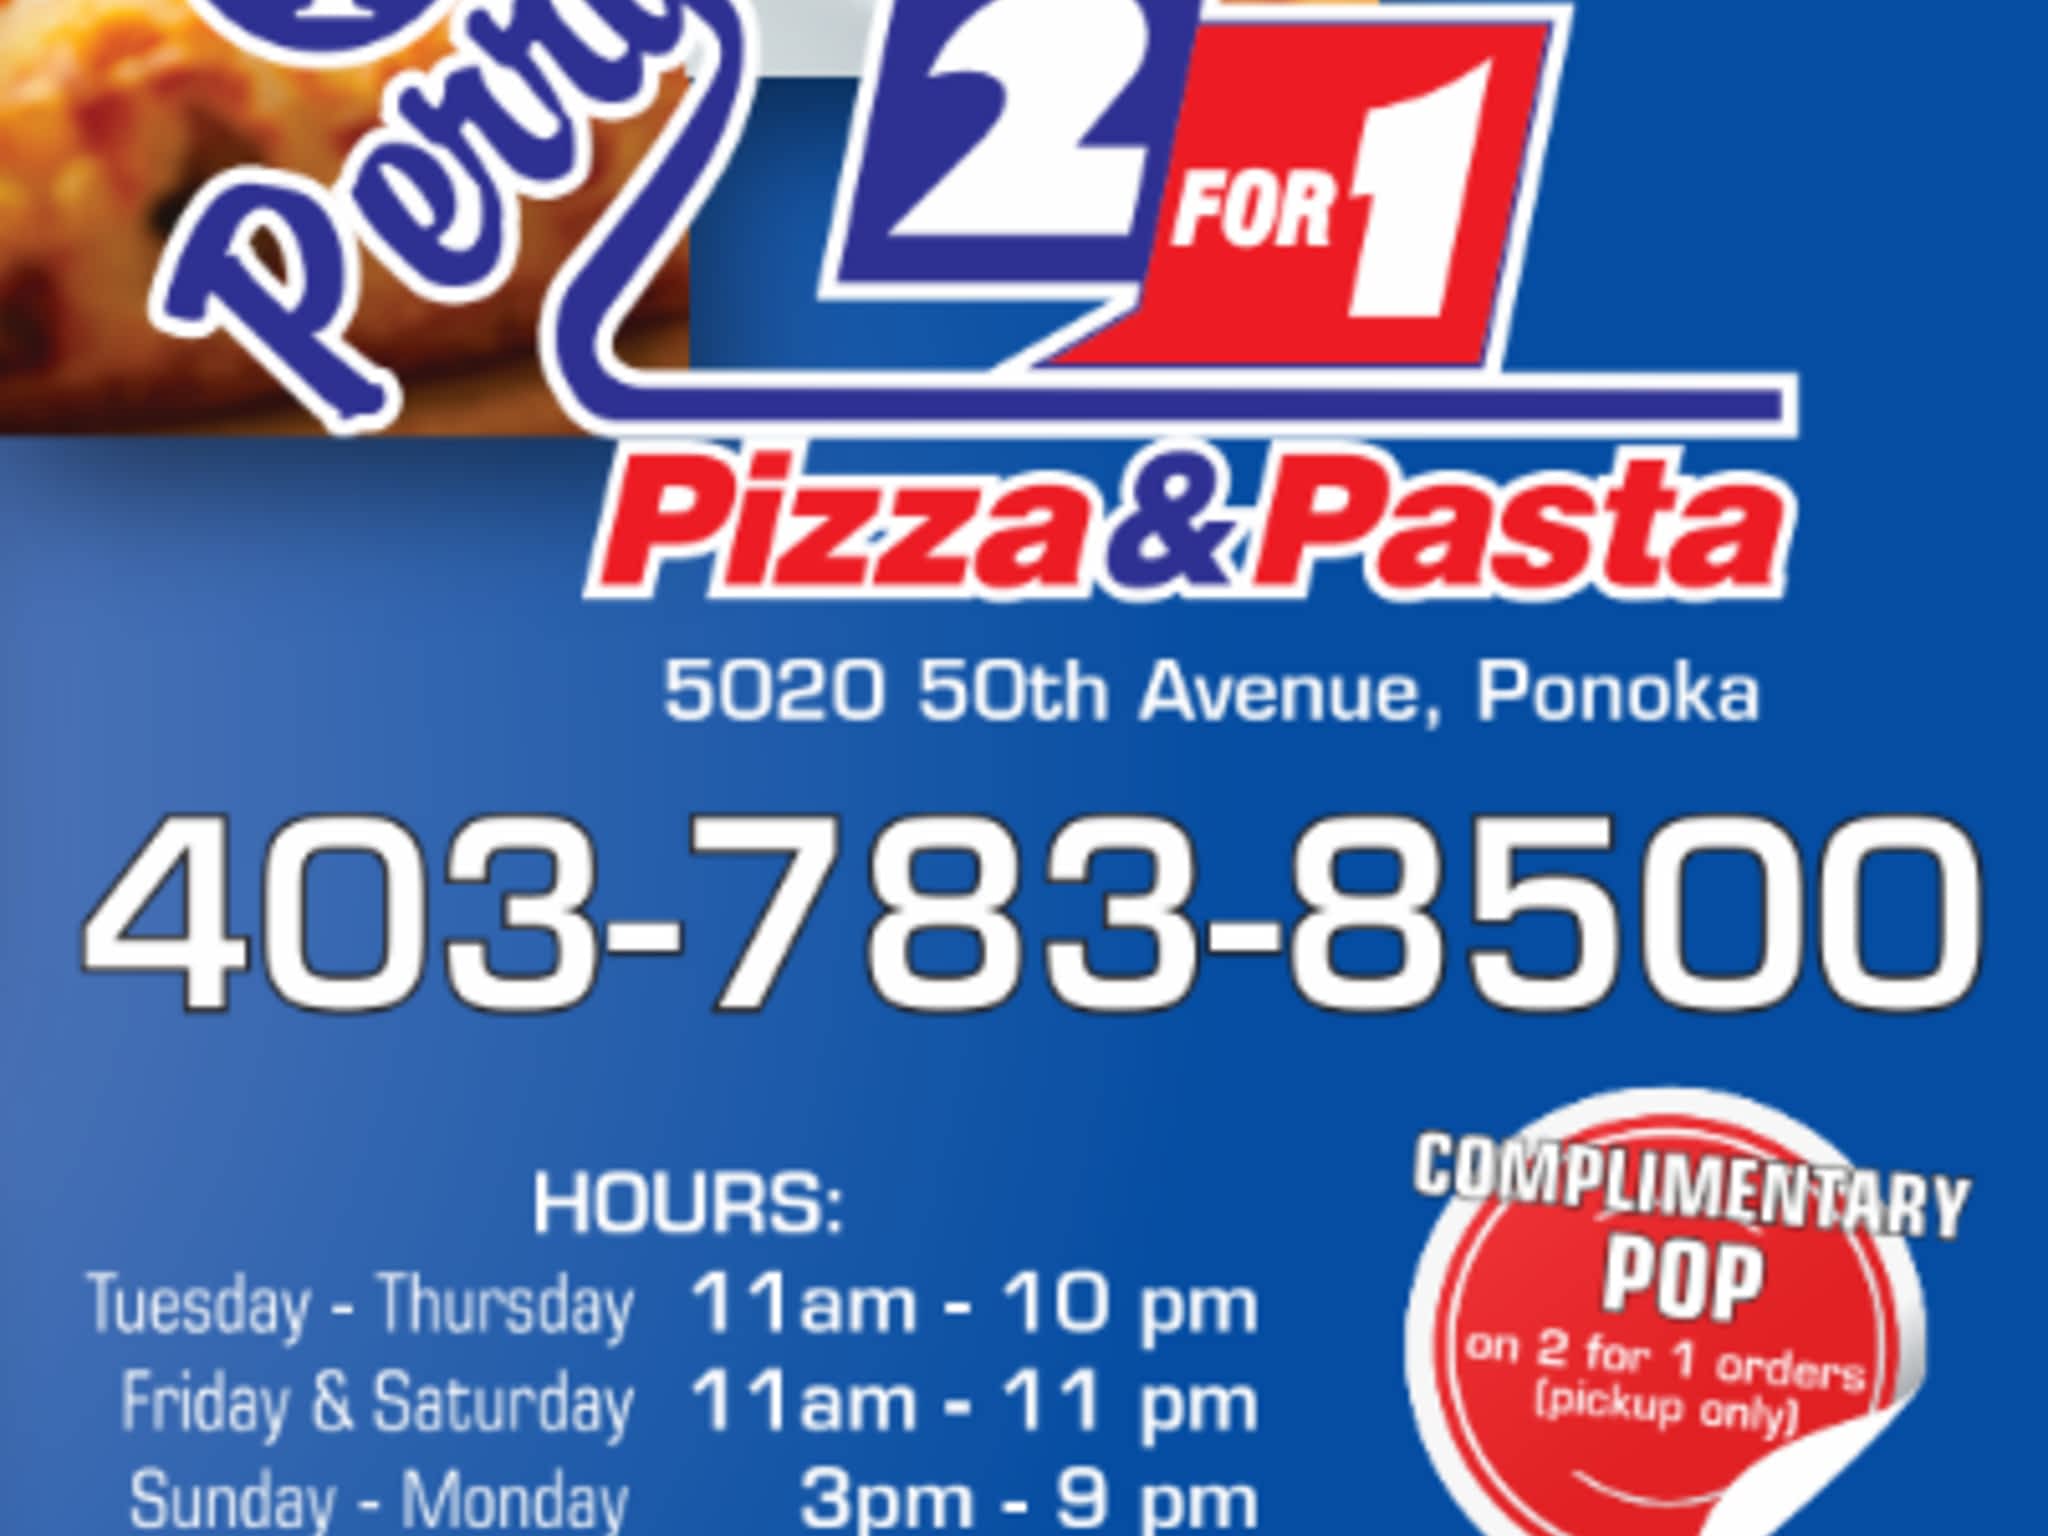 photo Perry's 2 for 1 Pizza & Pasta